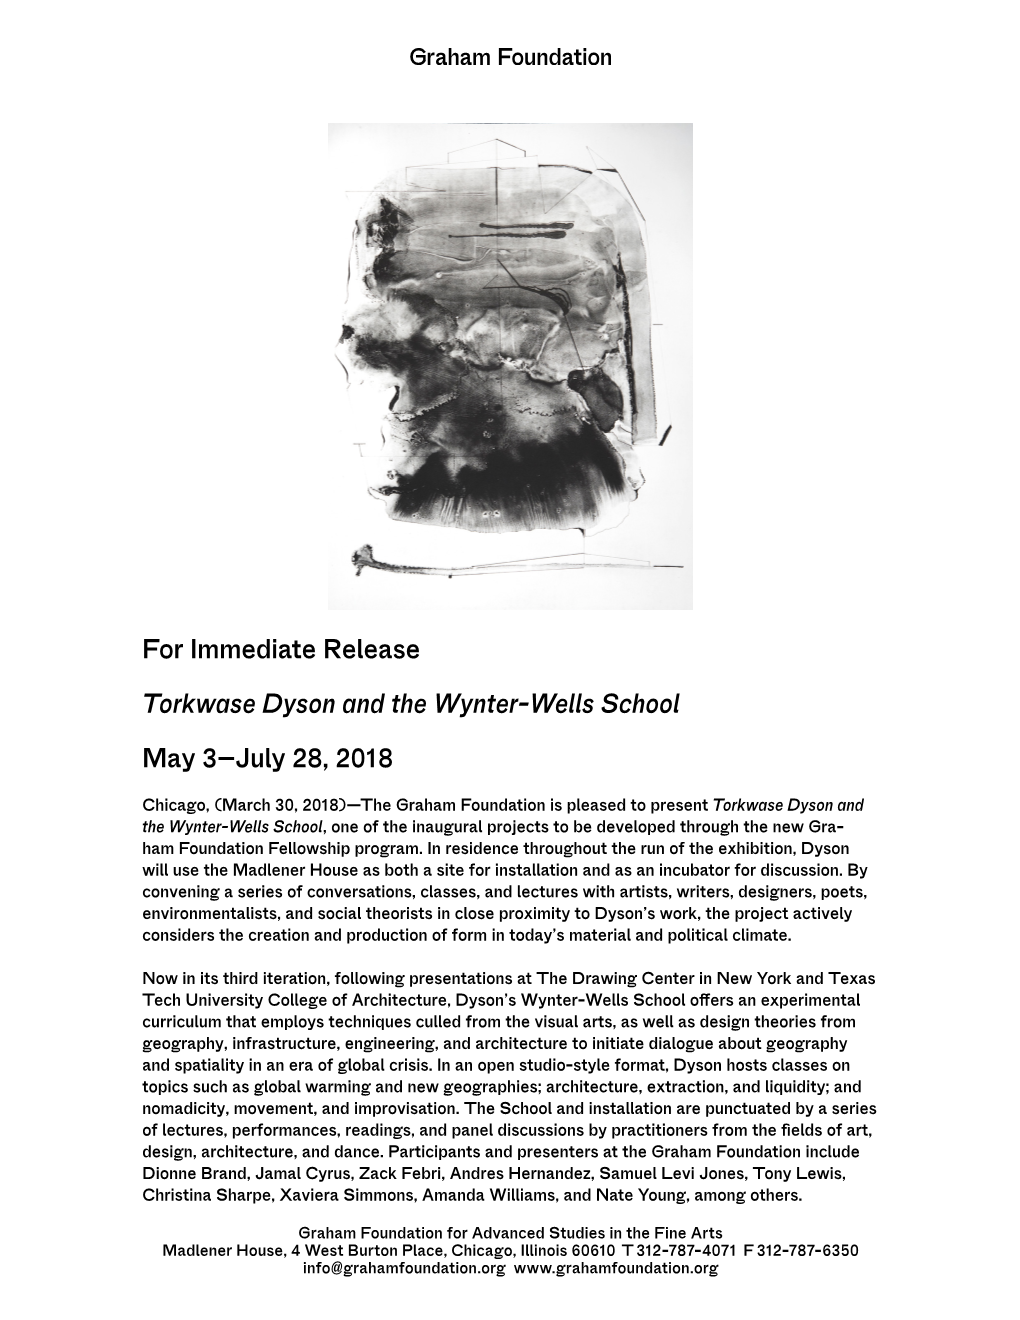 For Immediate Release Torkwase Dyson and the Wynter-Wells School